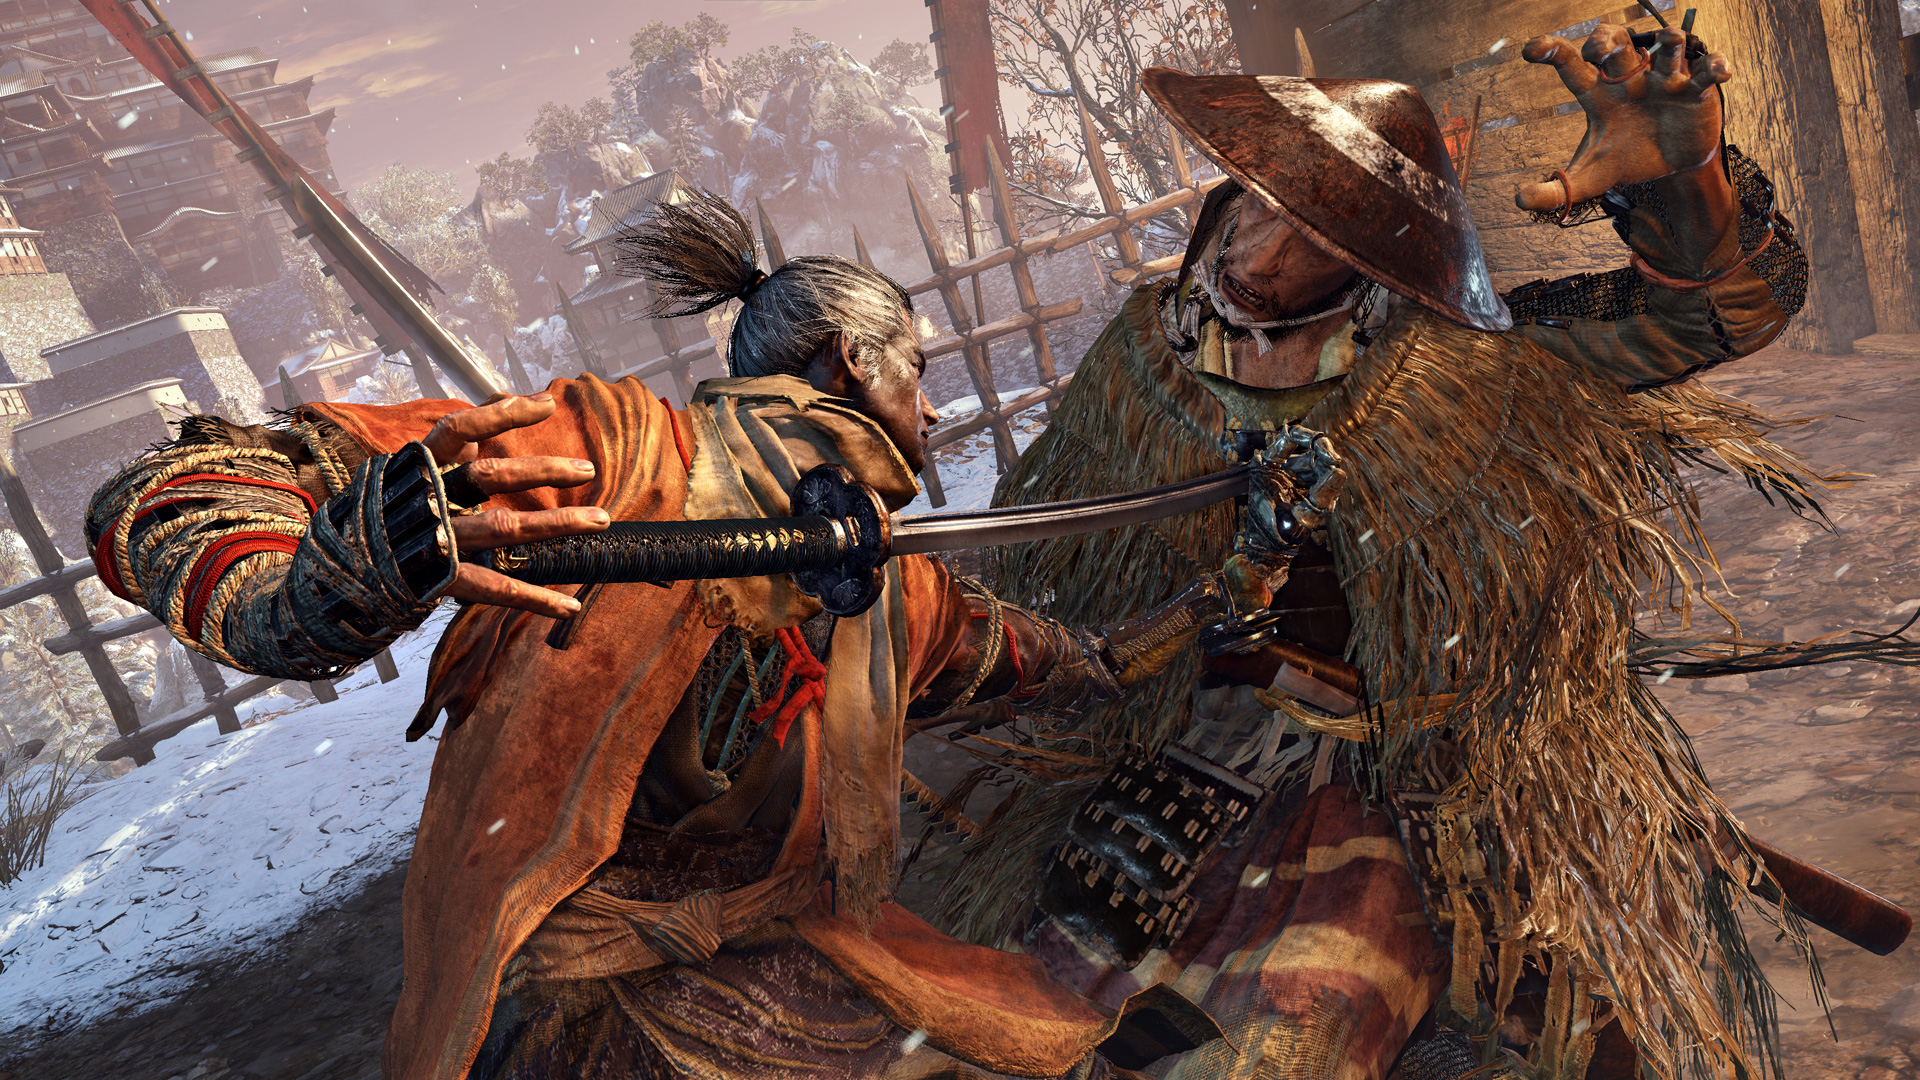 Forget Elden Ring 2: Why Sekiro 2 Should Be FromSoftware's Next